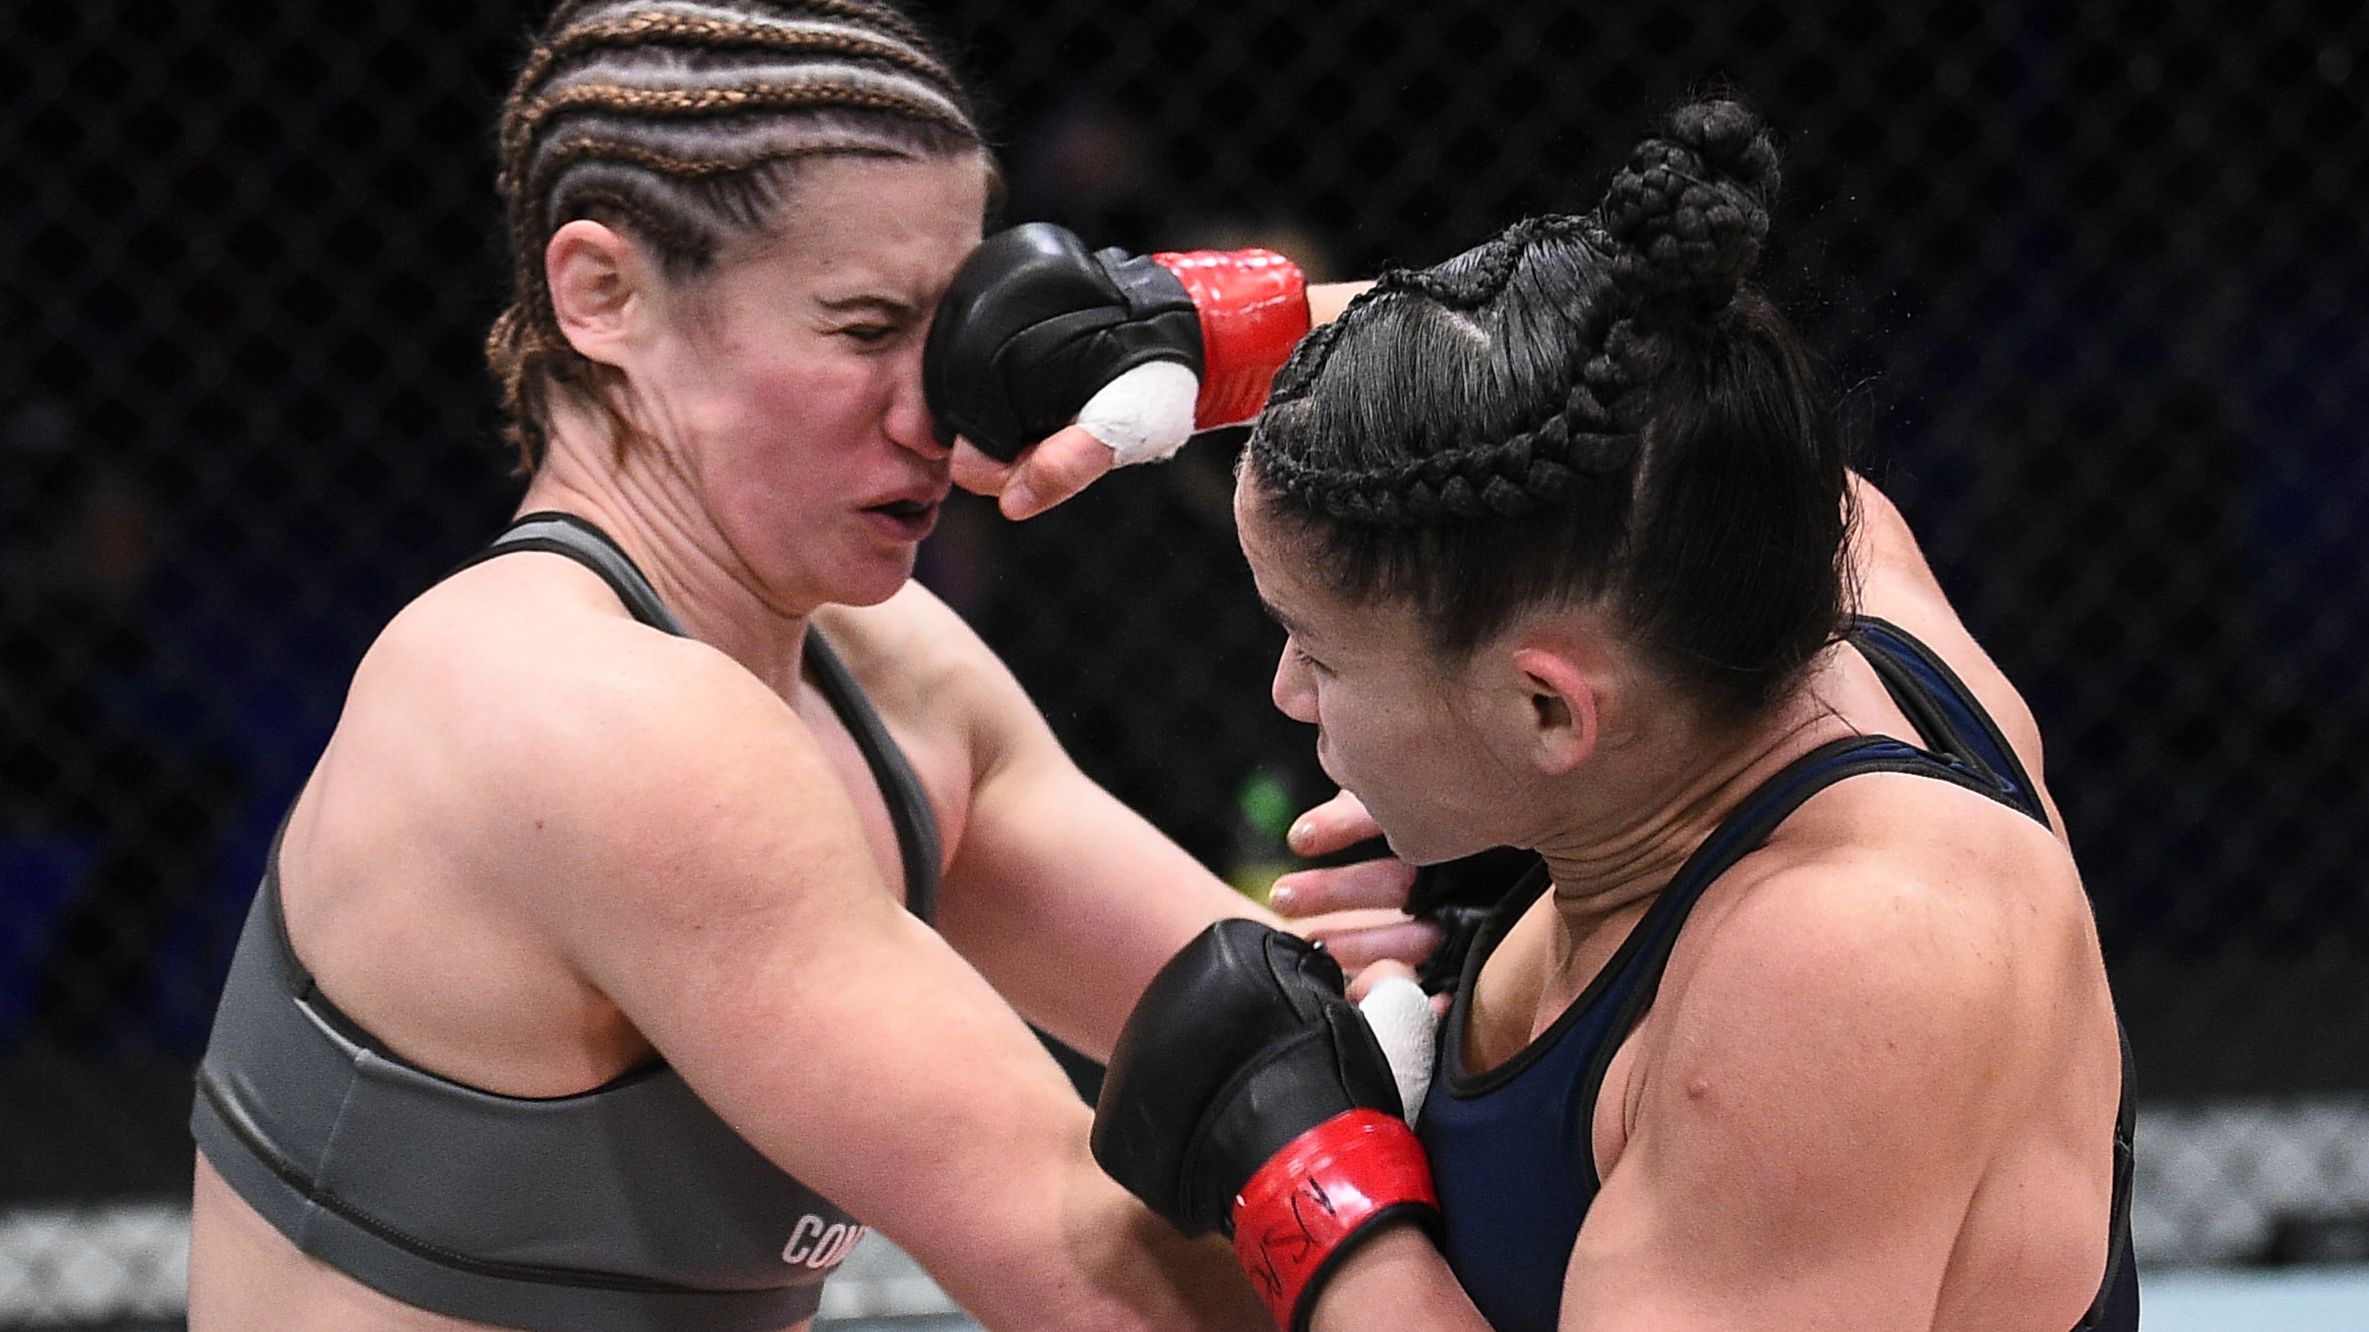 Chelsea Hackett lands a punch on Victoria Leonardo in their women&#x27;s flyweight bout during Dana White&#x27;s Contender Series in 2020.